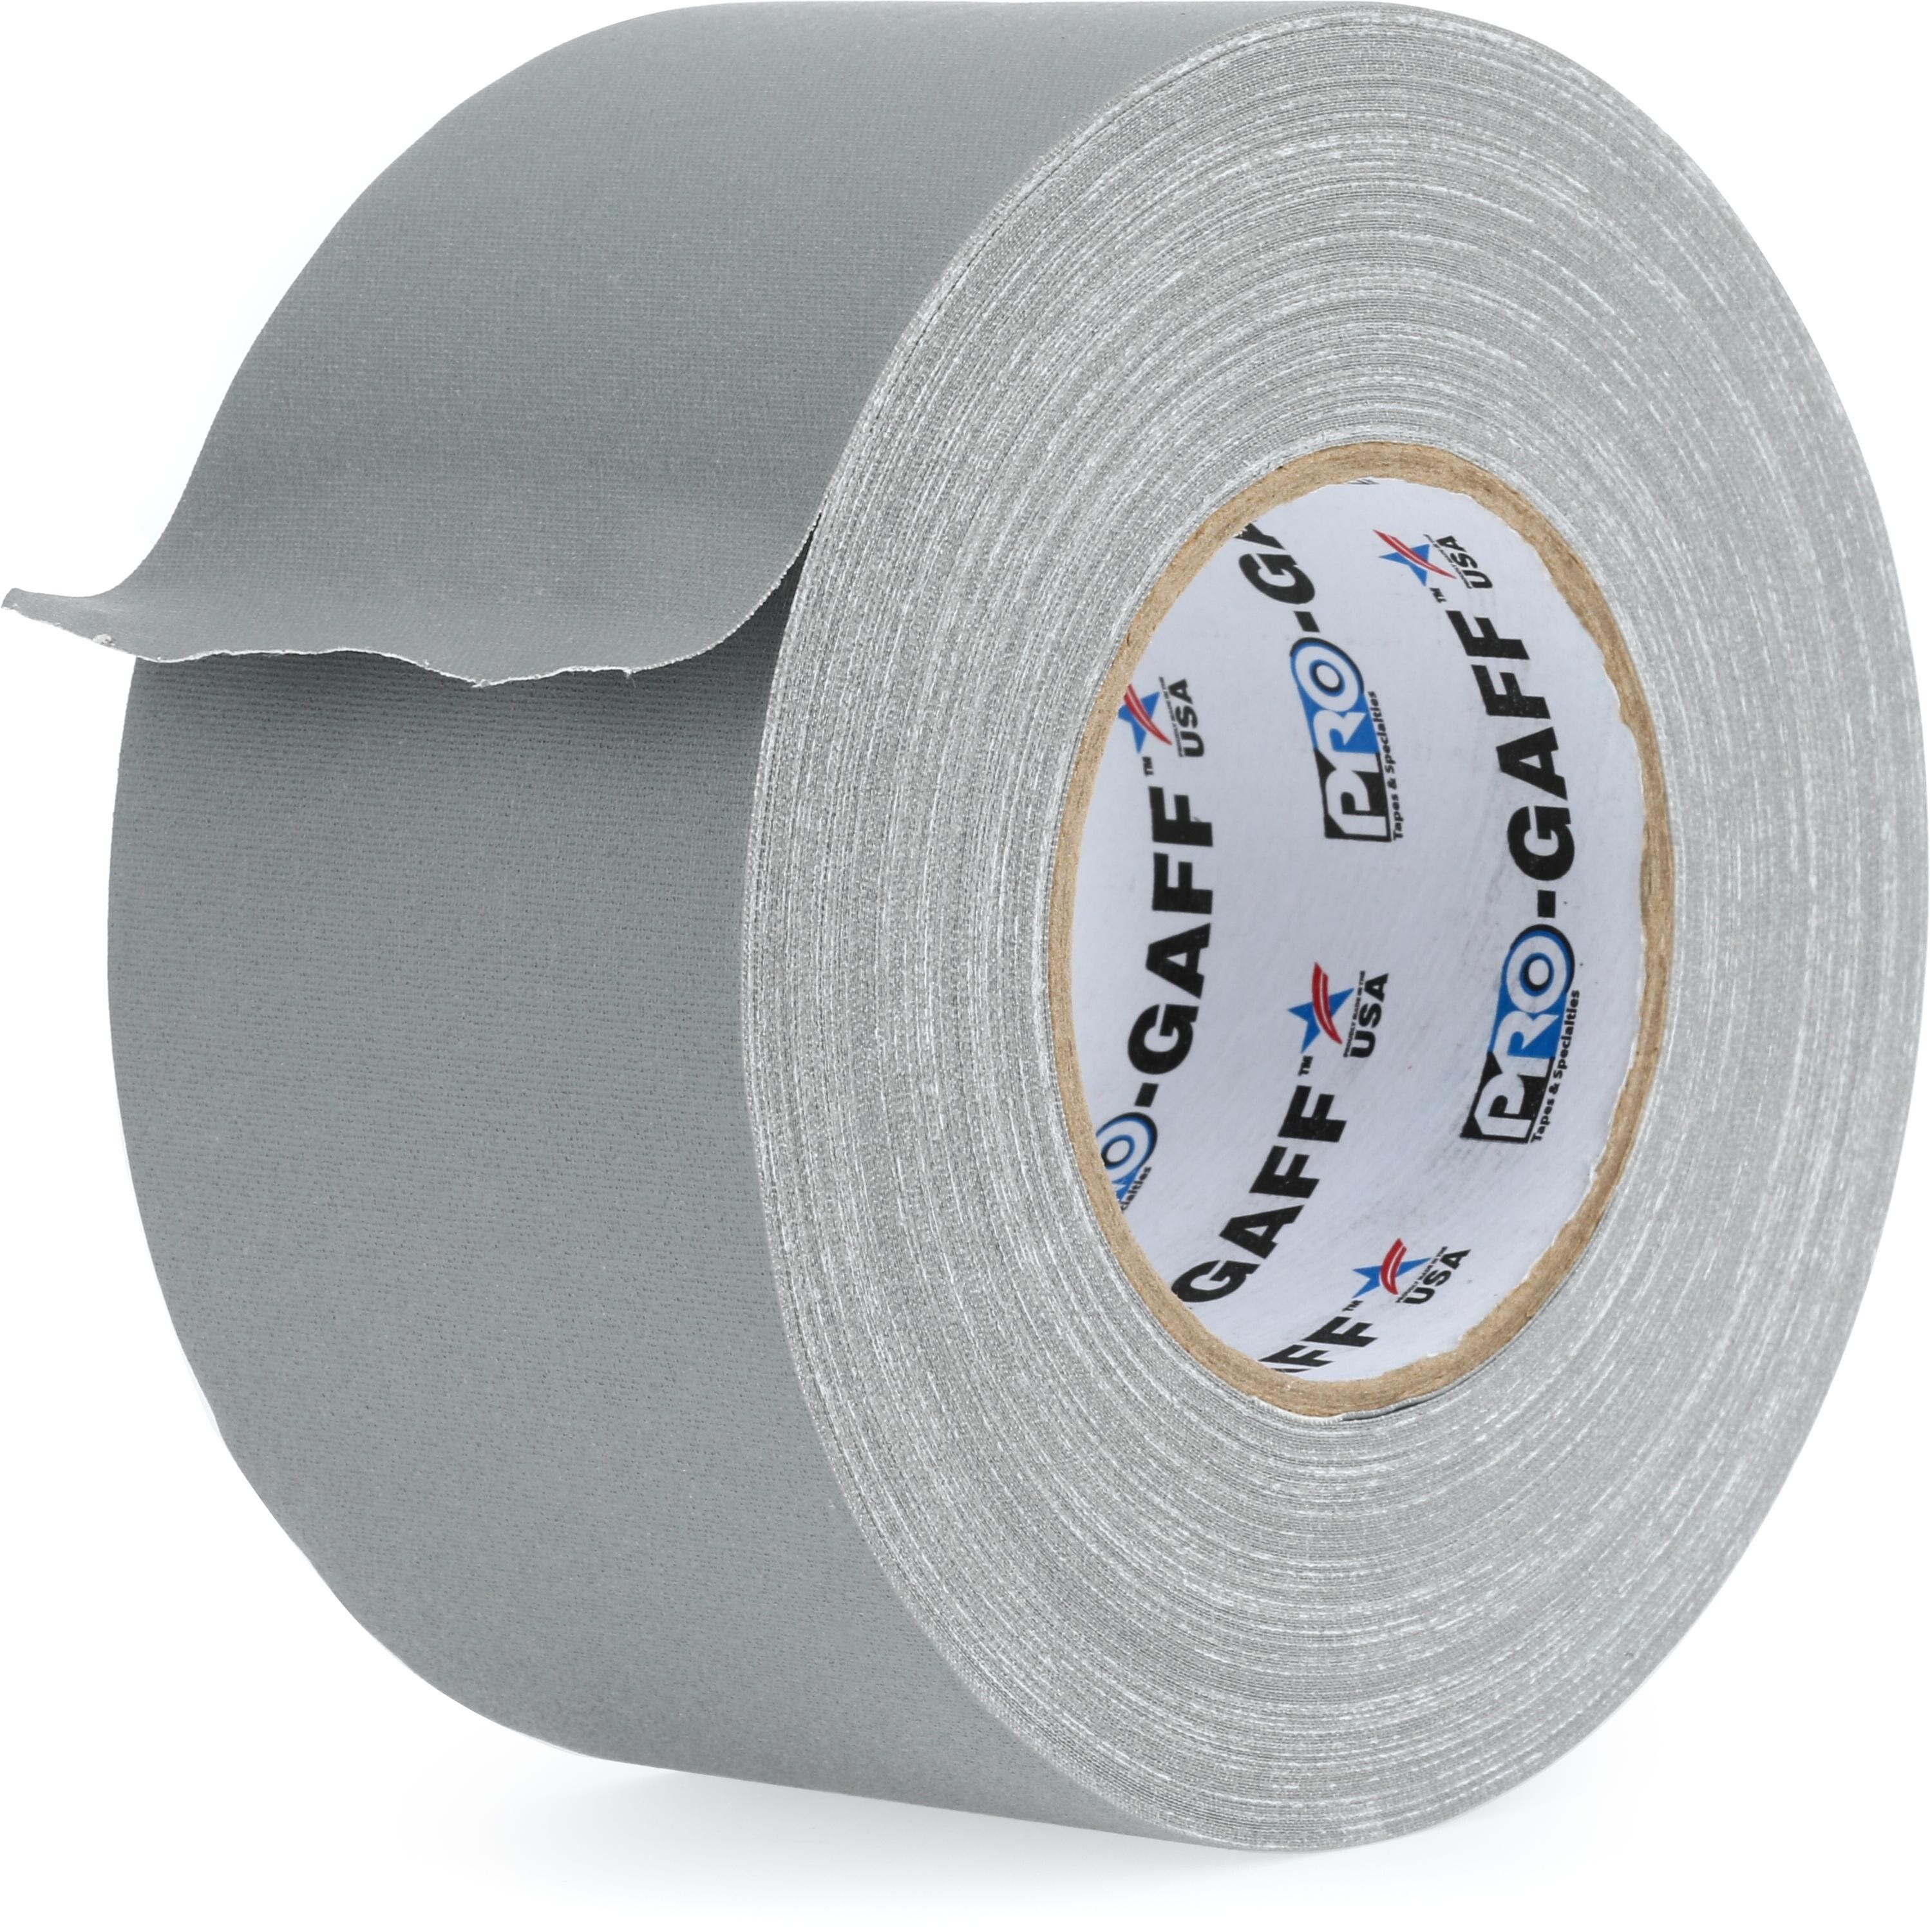 Pro Tapes Pro Gaff Premium 3-inch Gaffers Tape - 55-yard Roll - Gray